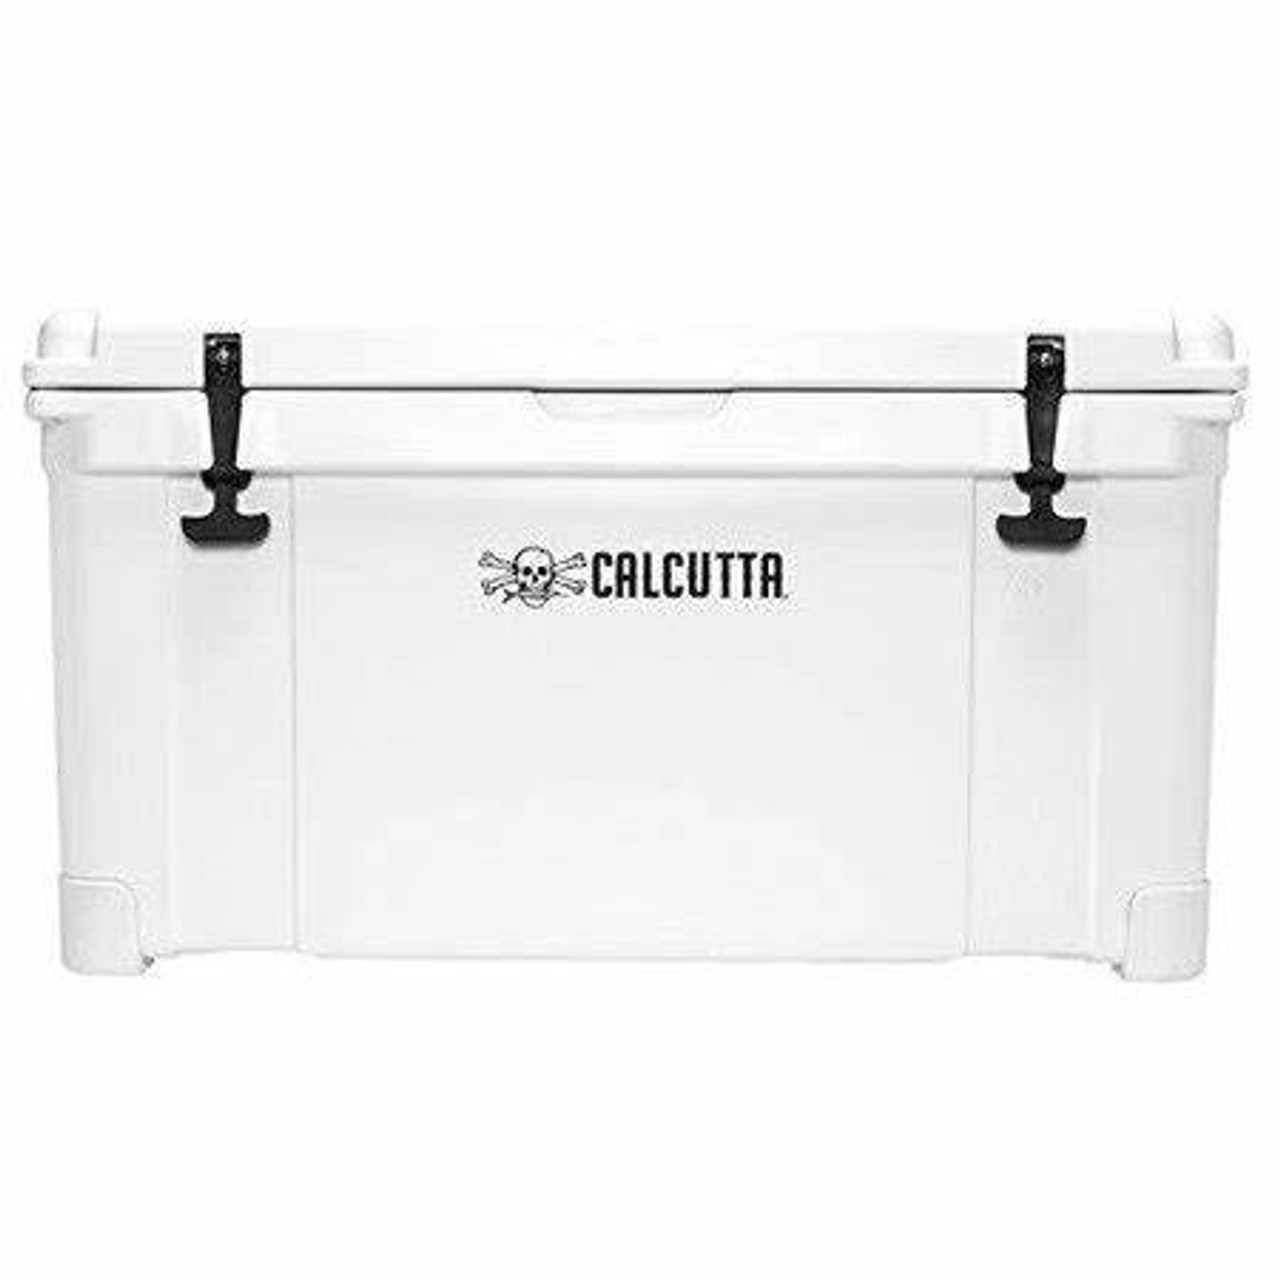 Calcutta Renegade Cooler 75 Liter White w/Removeable Tray, Divider & LED Drain Plug, EZ-Lift Rope Handles, 34.1"Lx17.4"Wx19.1"H